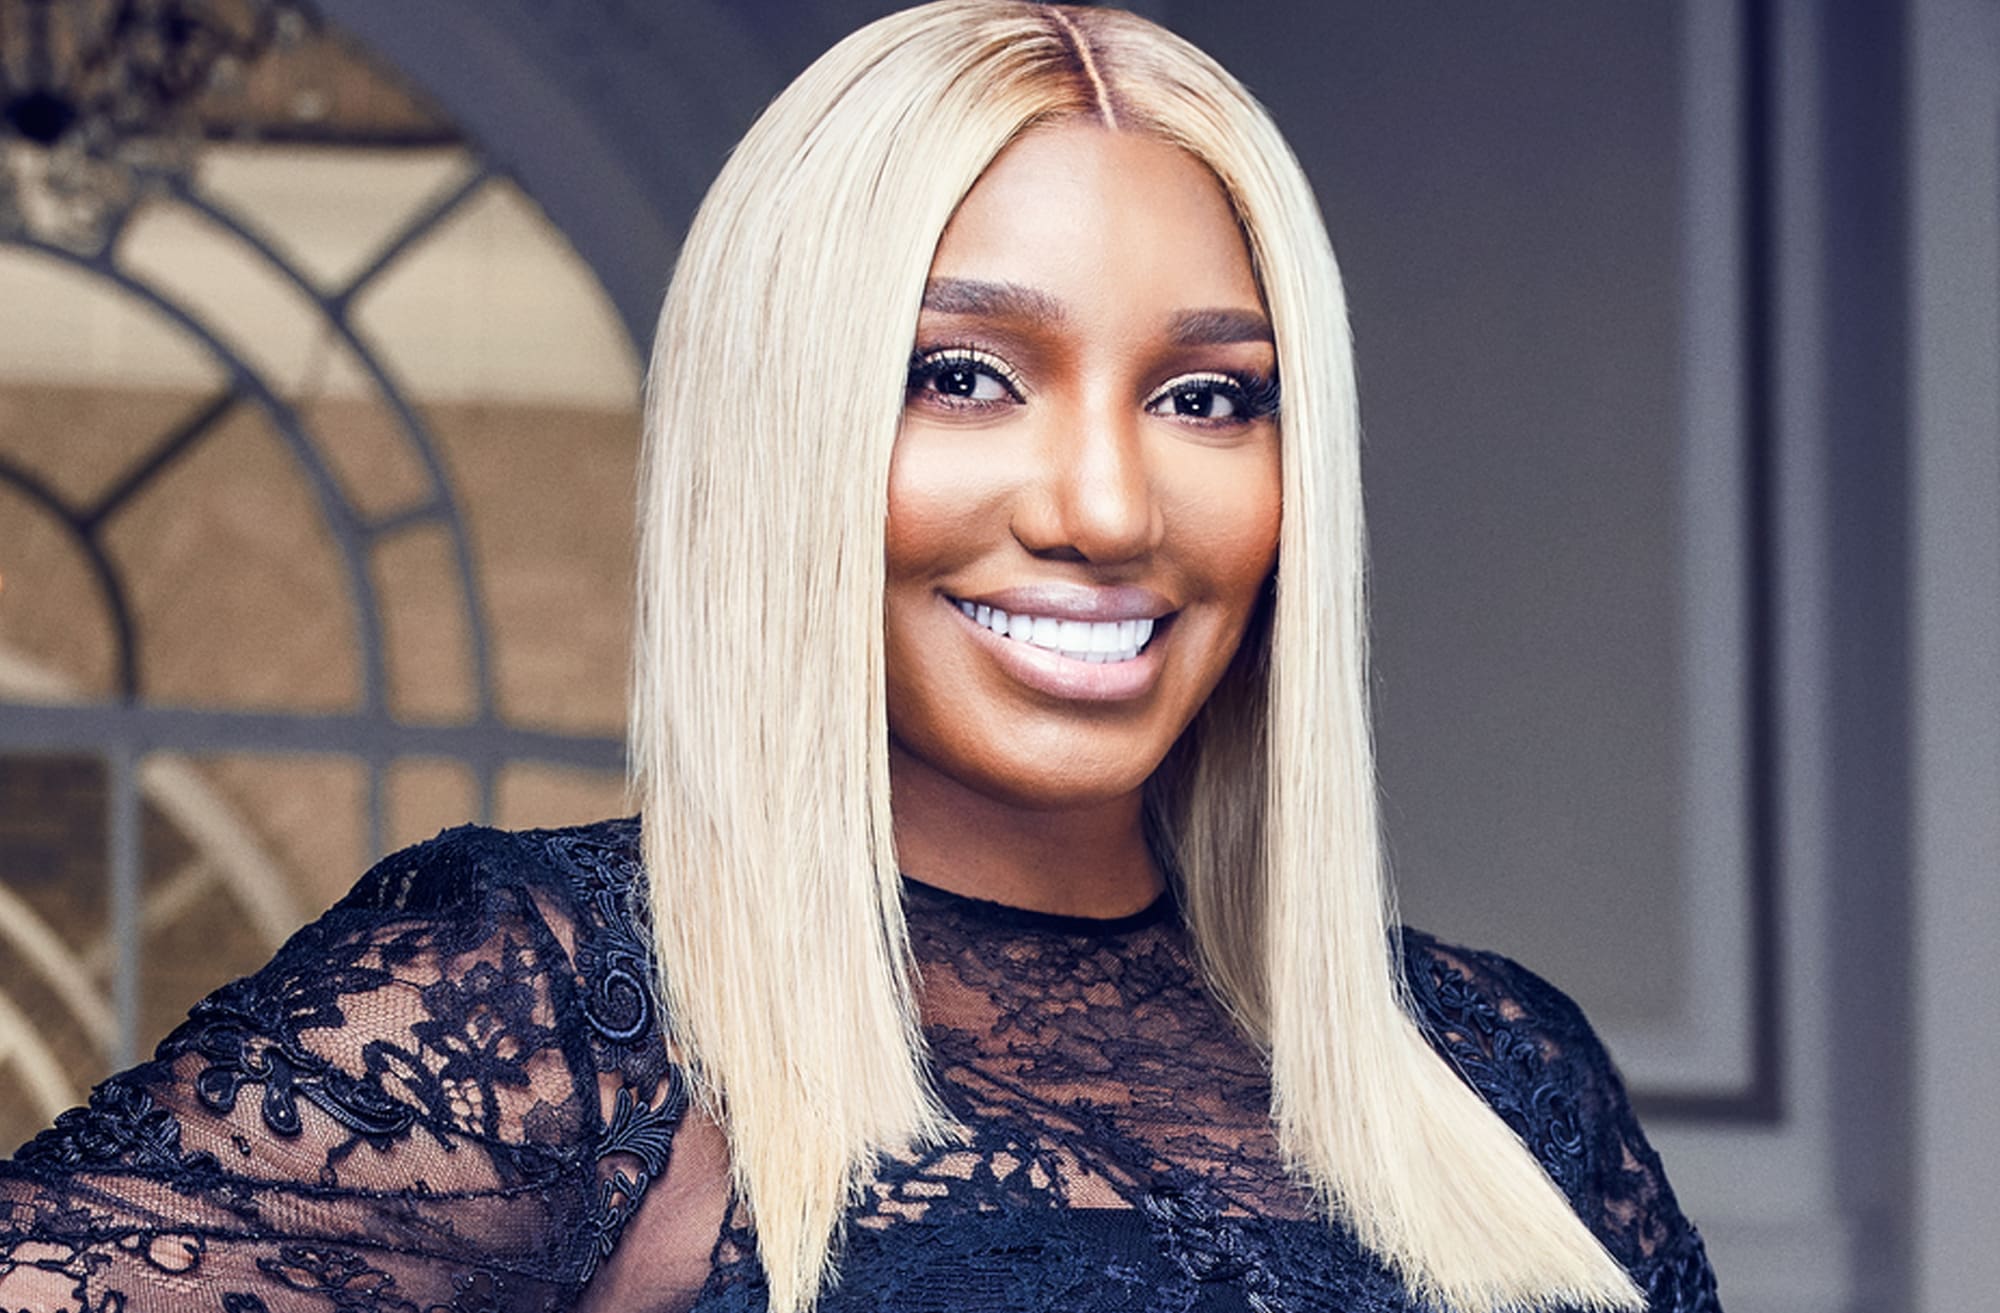 nene-leakes-looks-amazing-in-her-latest-pics-check-them-out-here